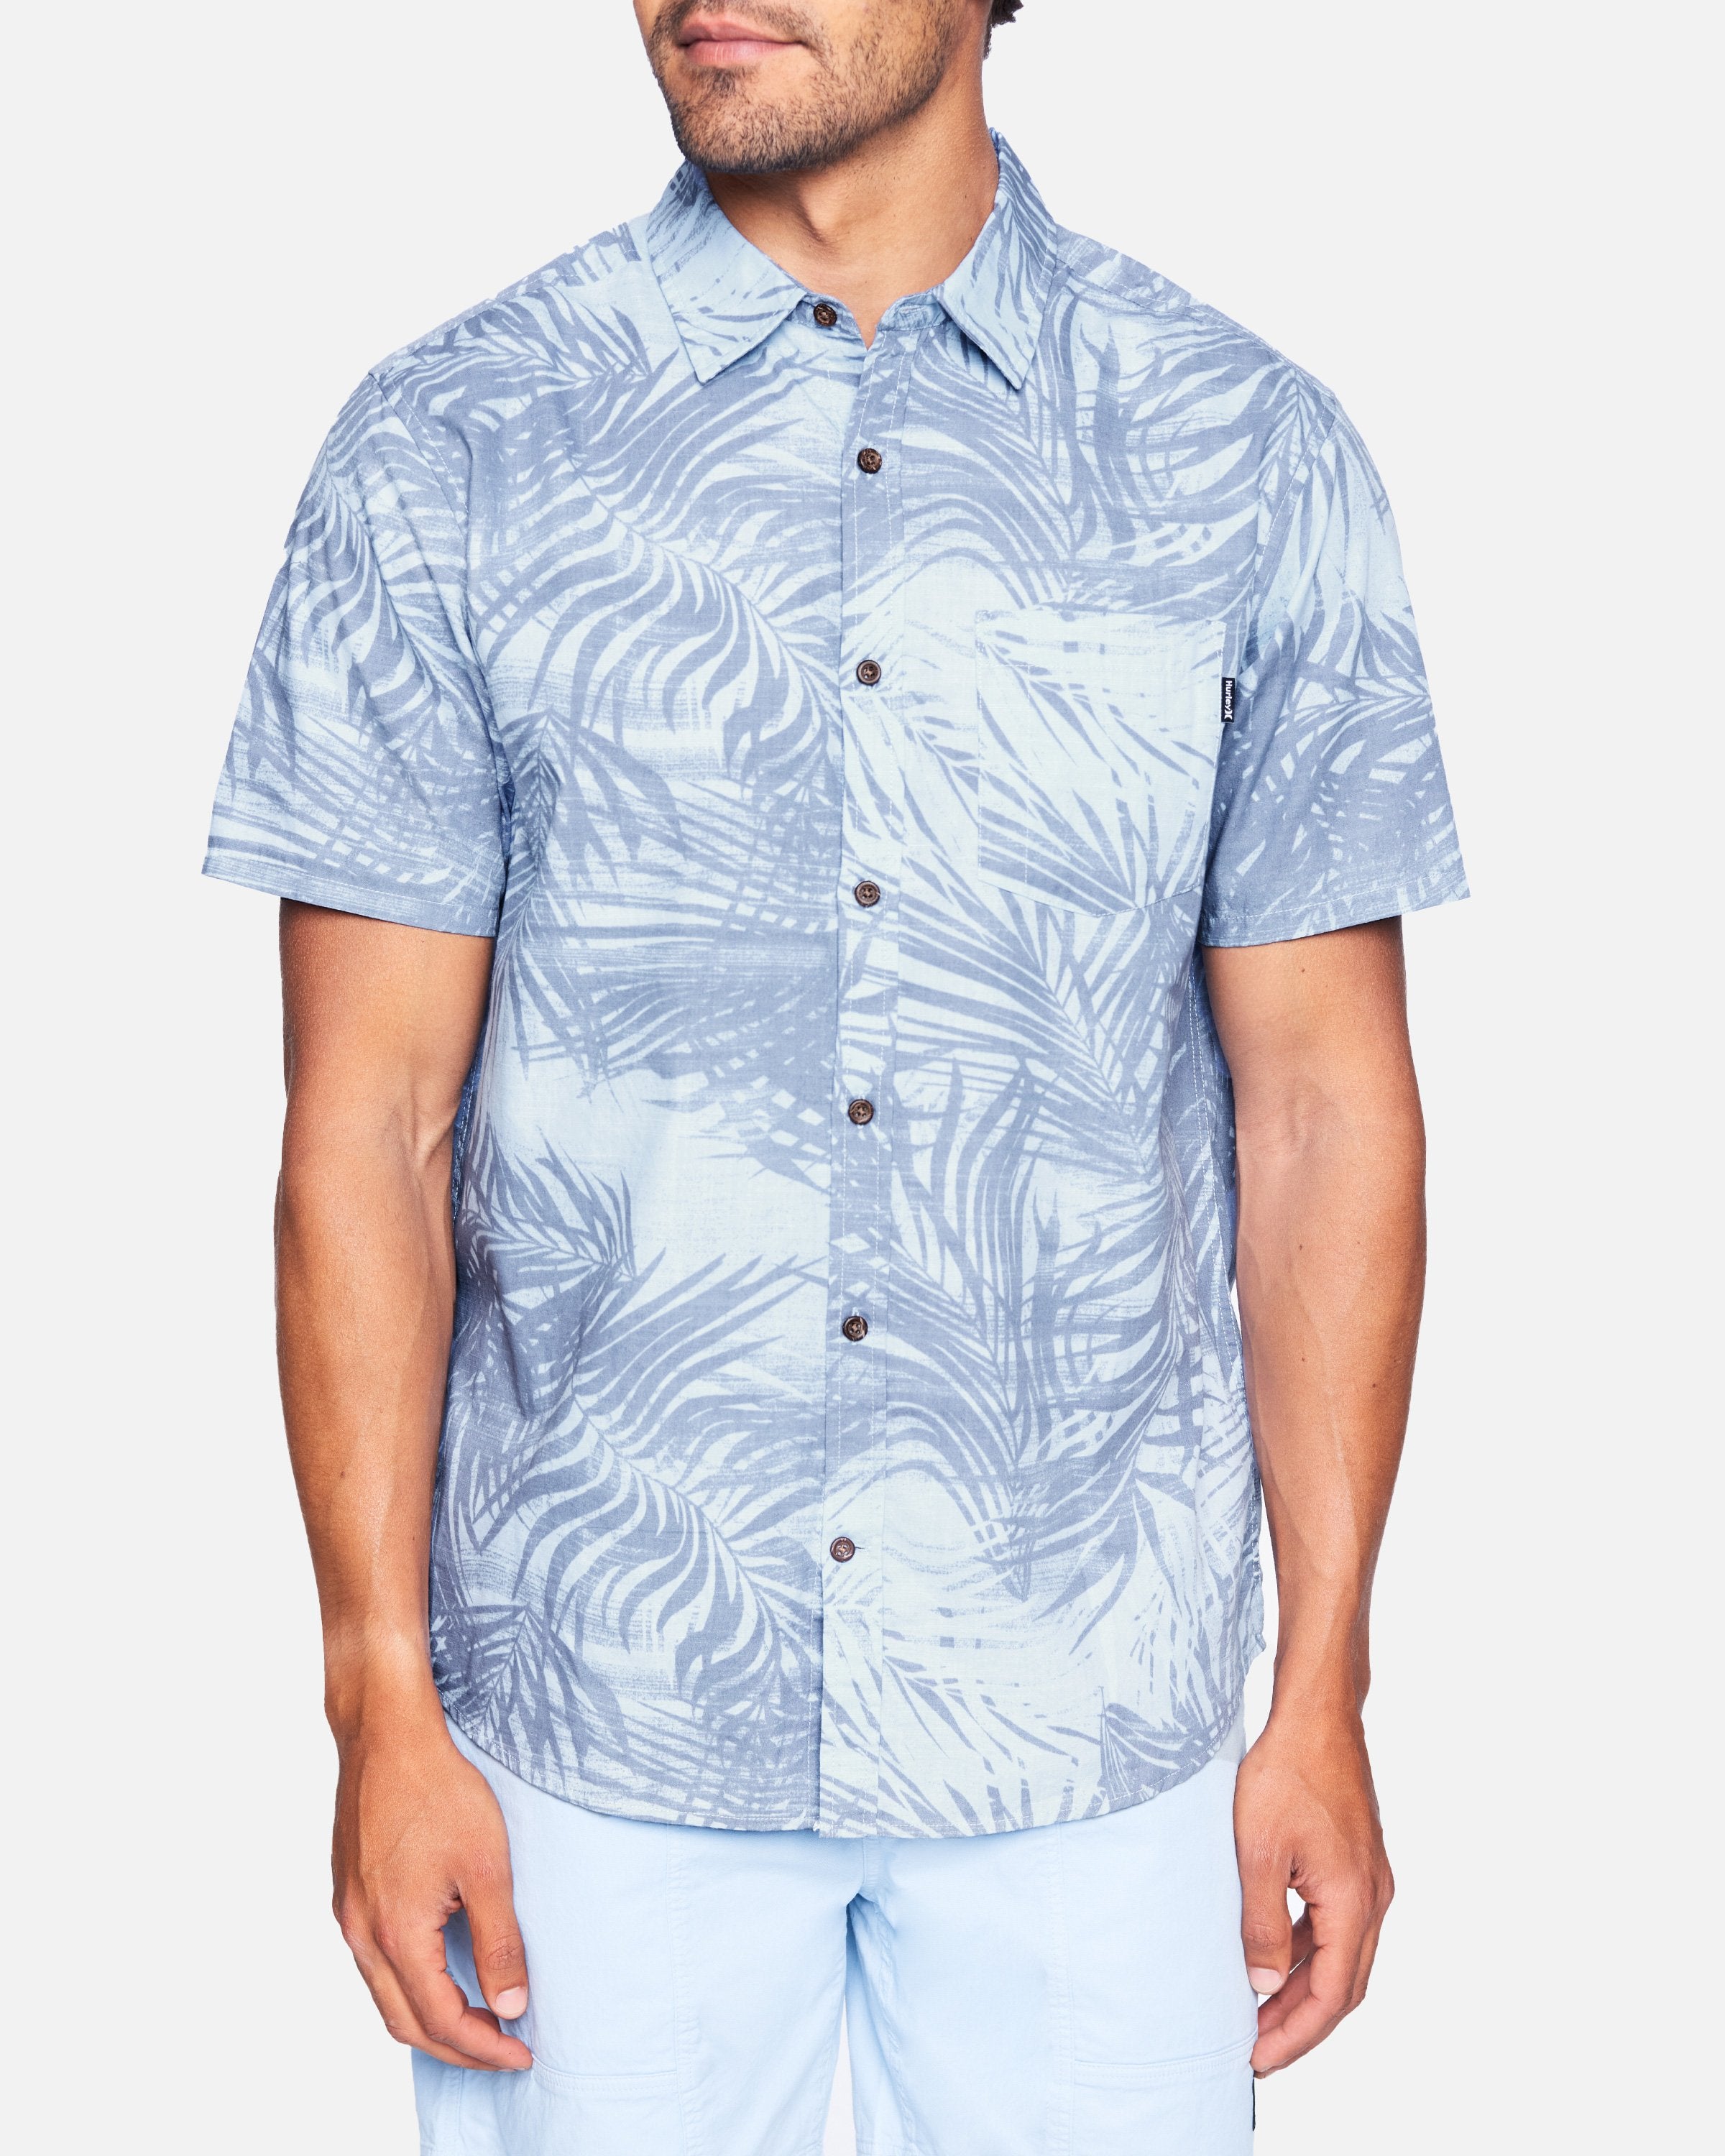 Men's Scan Palms Shirt in Psychic Blue, Size Small